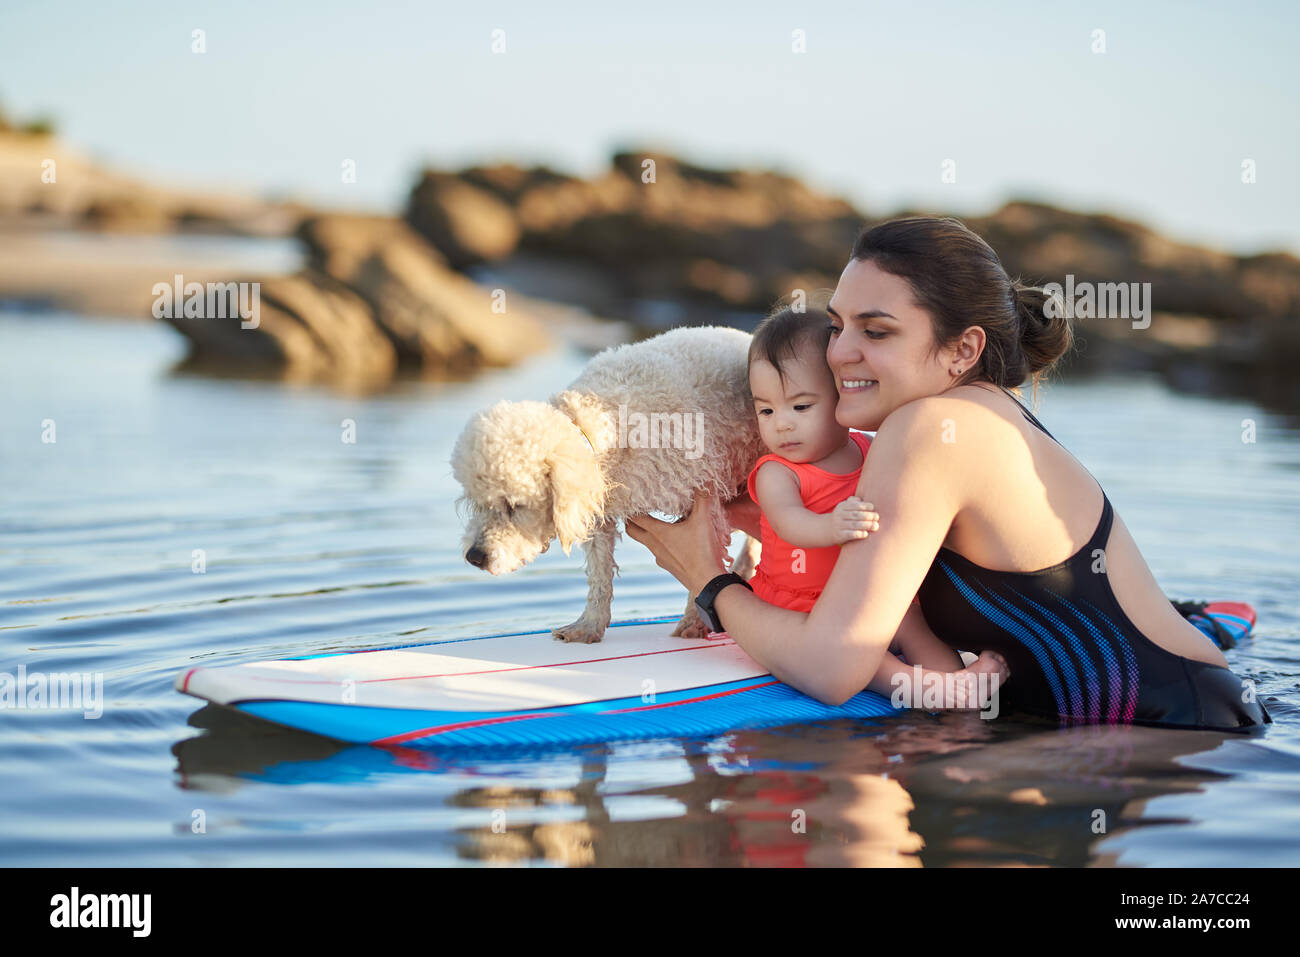 Baby girl learning to surf on board with poodle dog Stock Photo